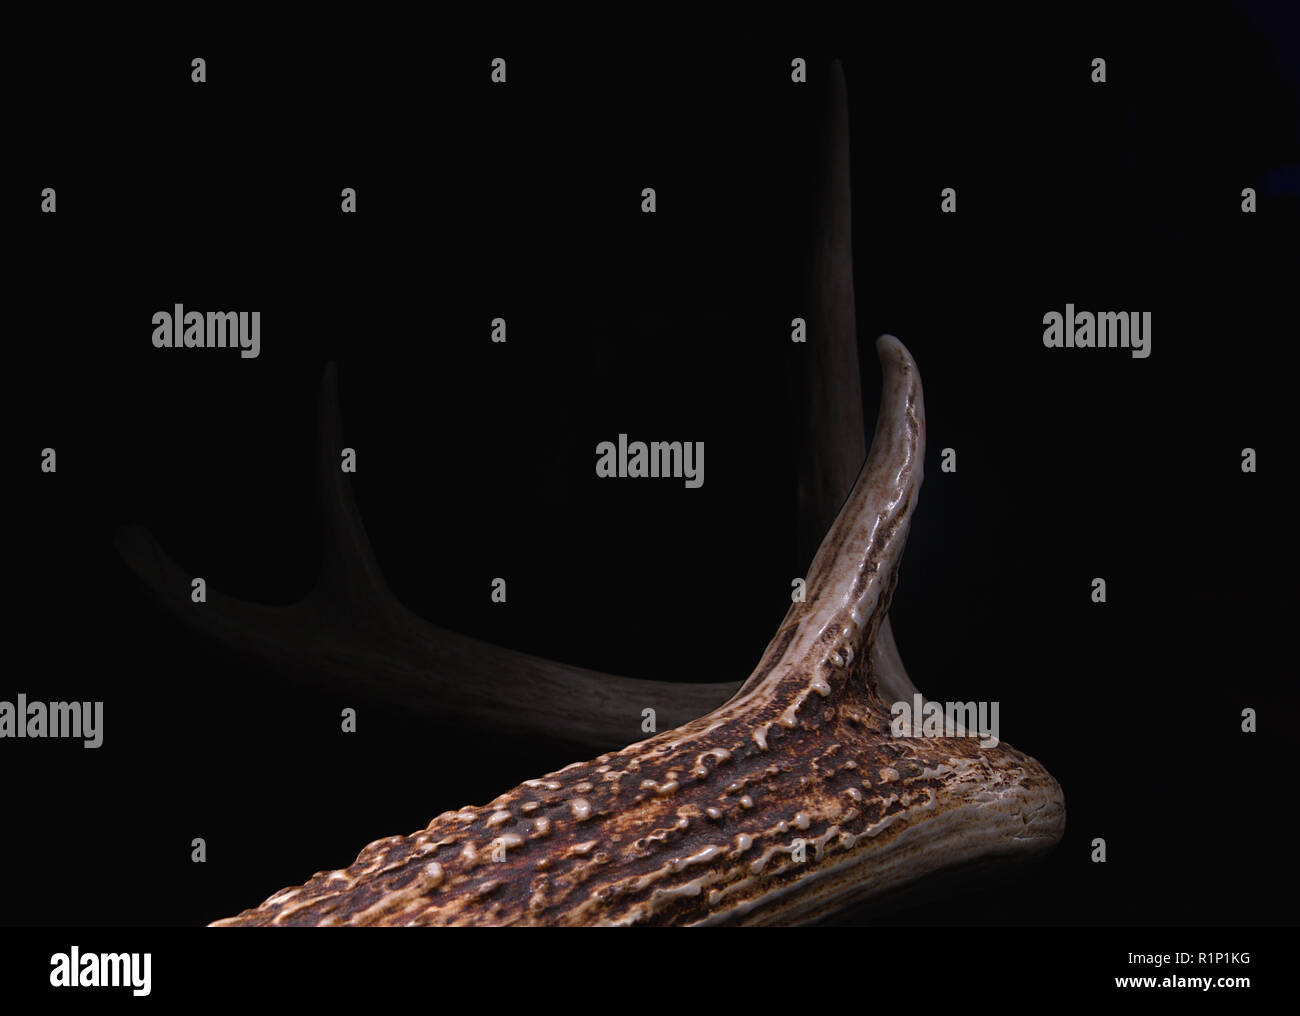 Deer antler lit with a led lamp on a black glossy background give a unique effect witch can be used for a diversity of opportunity Stock Photo